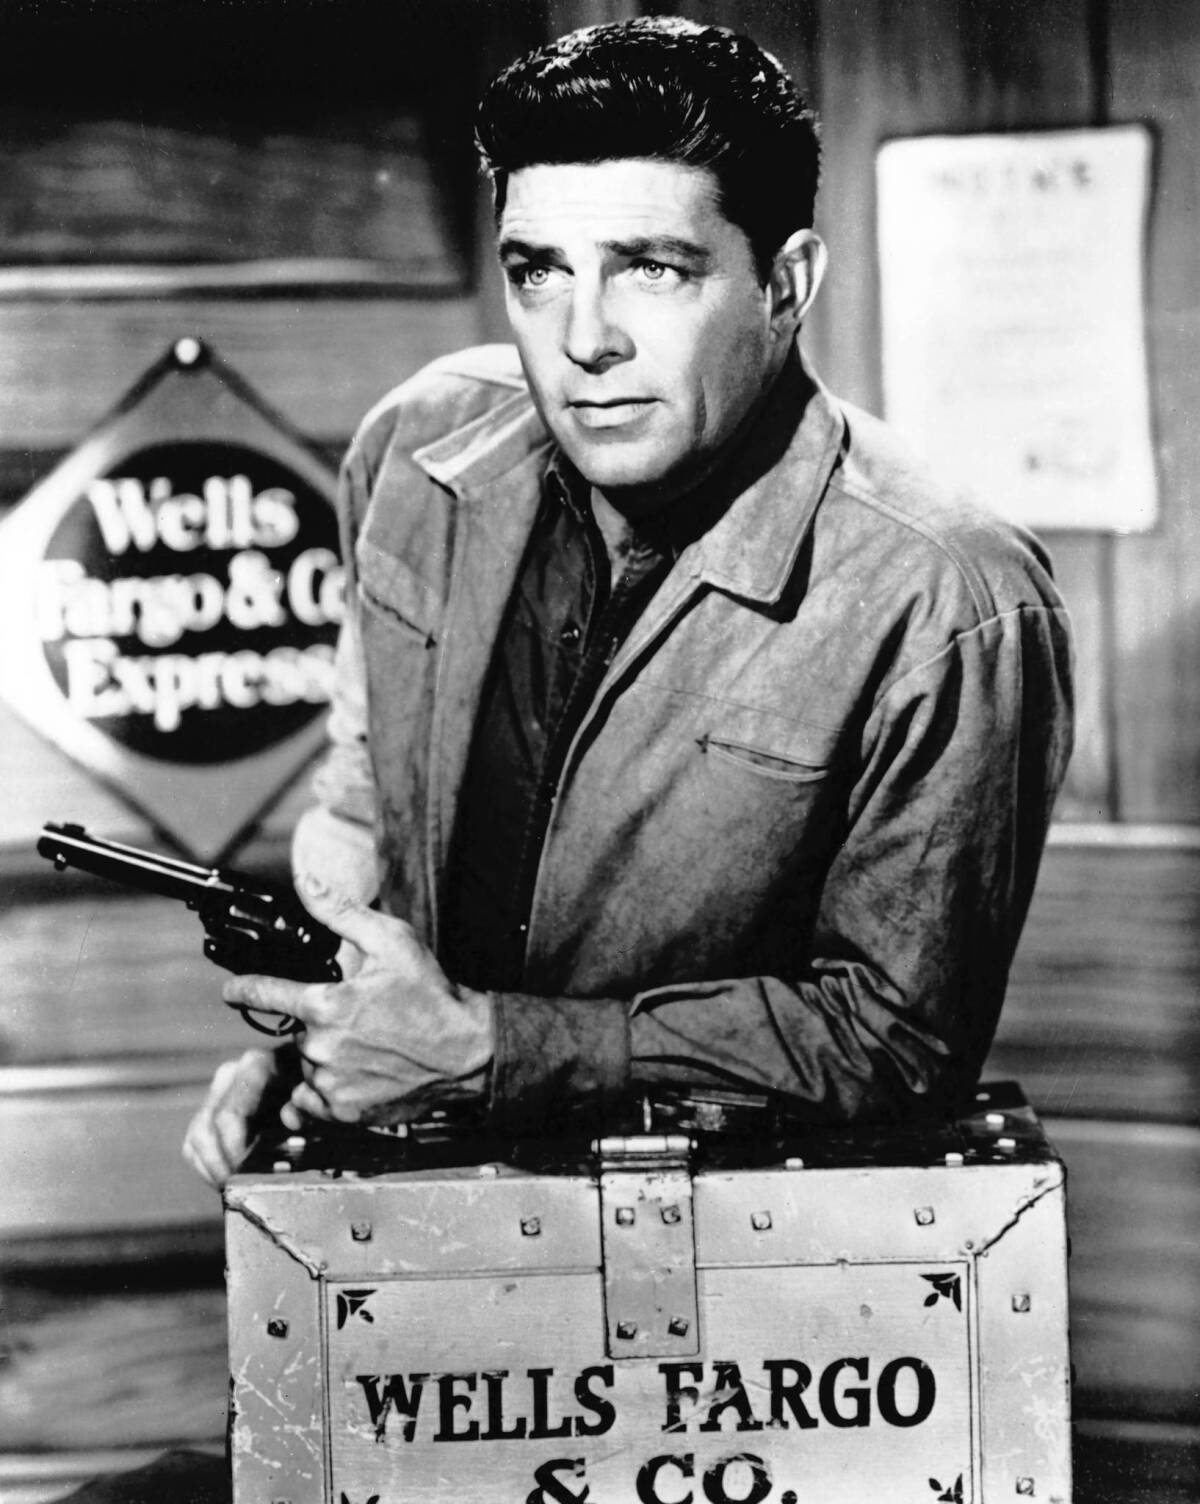 Dale Robertson starred as stagecoach troubleshooter Jim Hardie in the TV series "Tales of Well Fargo" from 1957 to 1962. He was 89.